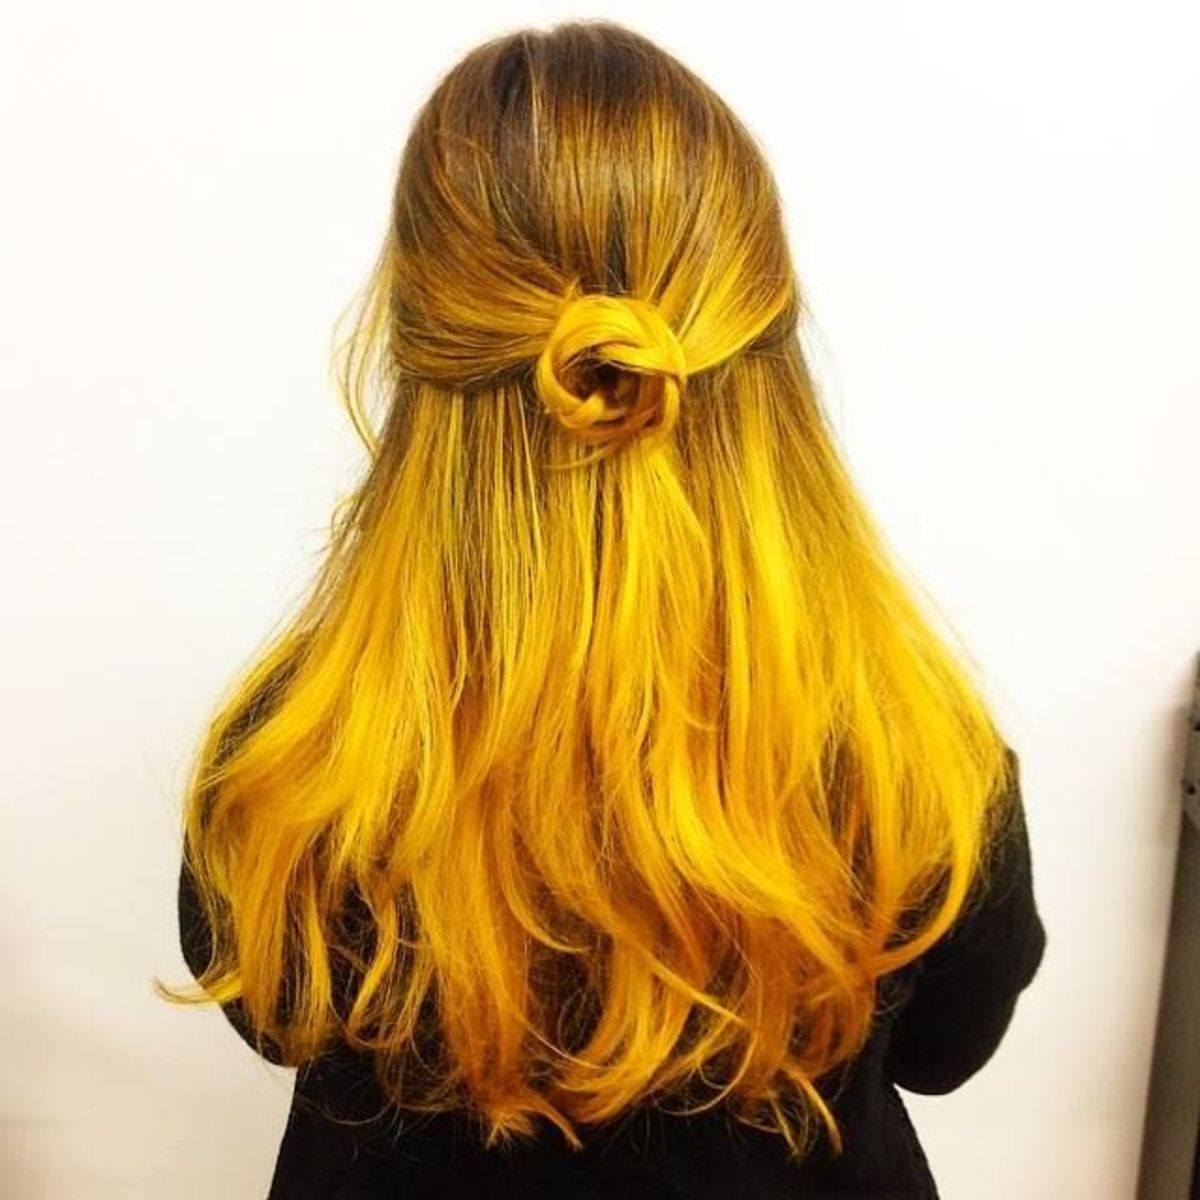 DIY Hair: 15 Orange and Yellow Hair Color Ideas | hubpages